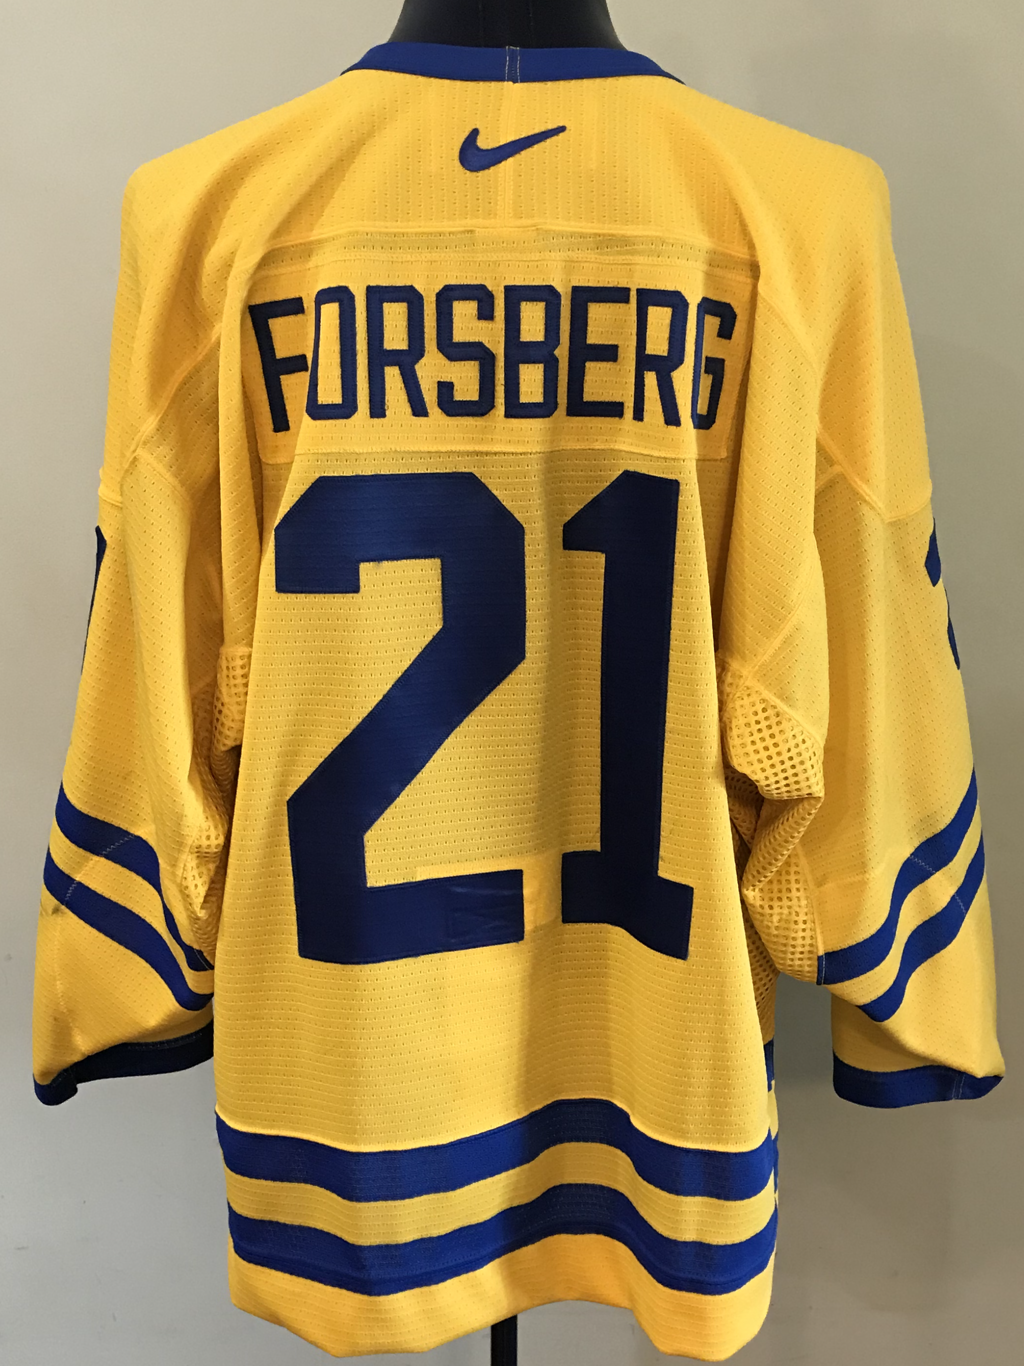 1998-99 Peter Forsberg Colorado Avalanche Game Worn Jersey